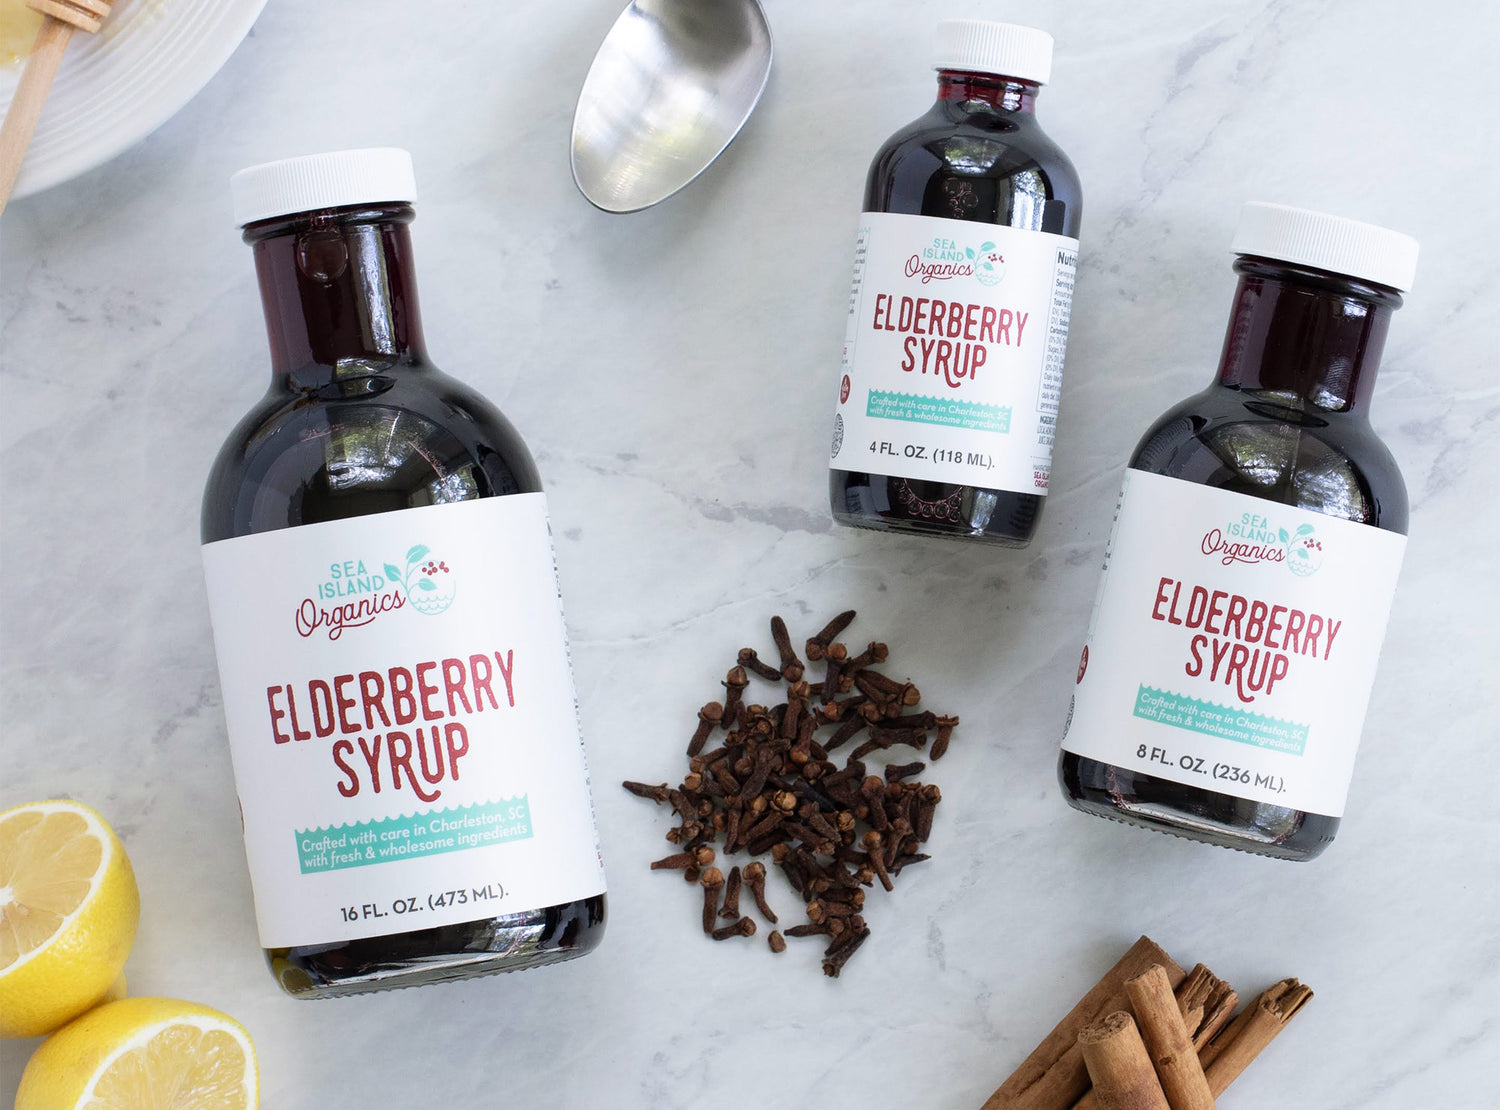 Three sizes of elderberry syrup and various ingredients on a marble countertop.